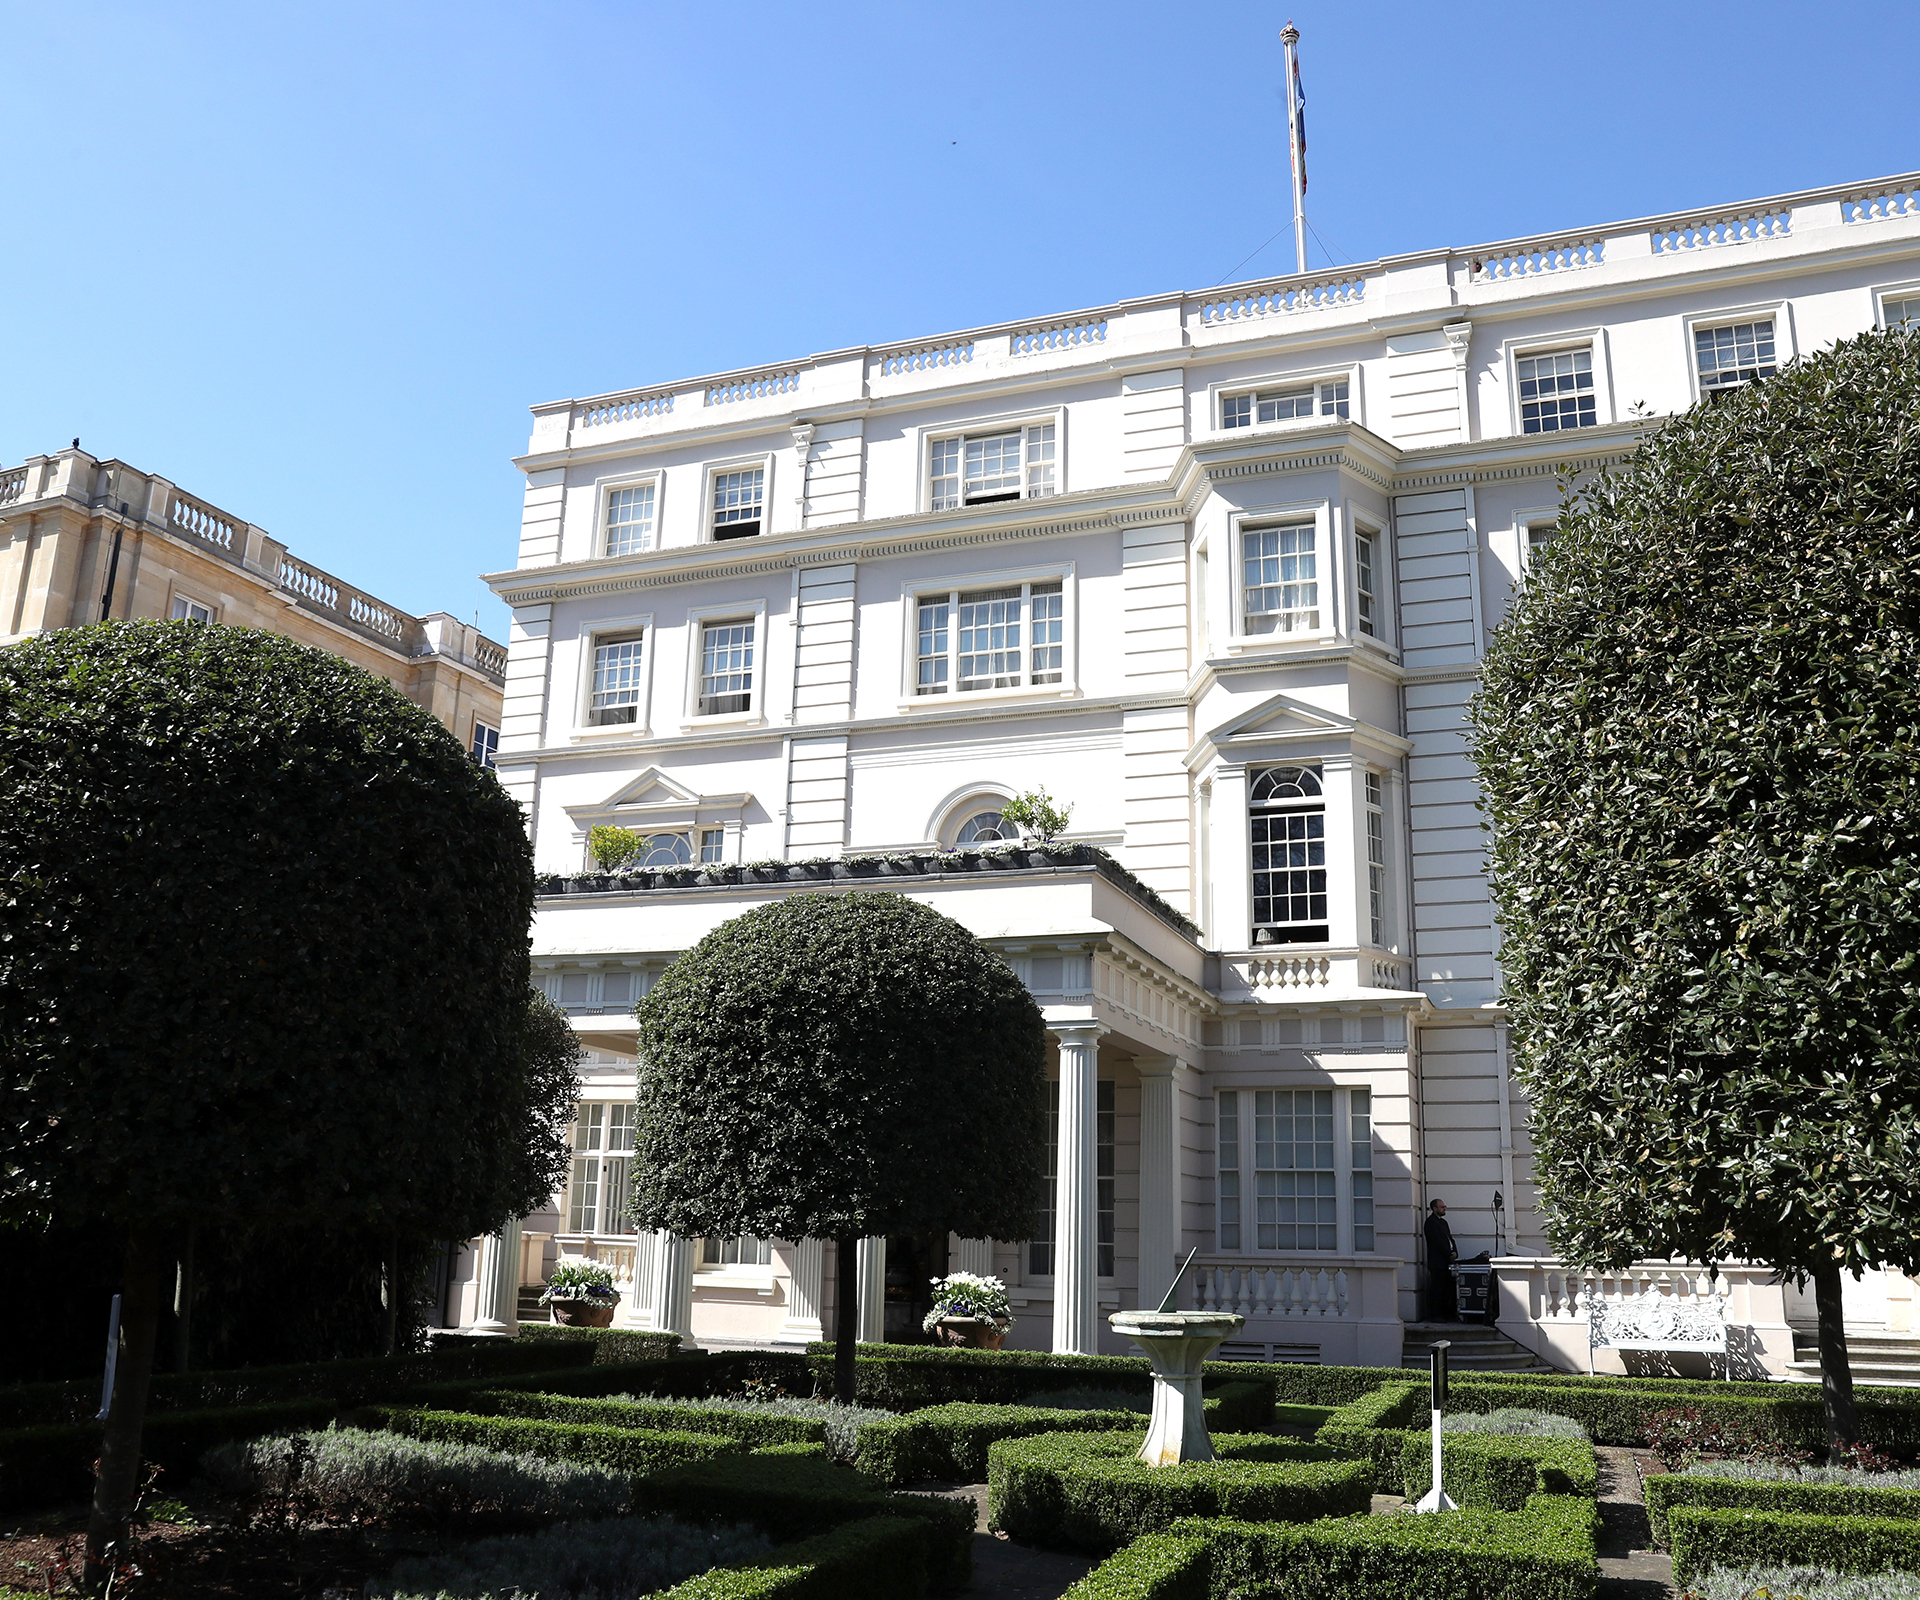 homes owned by the British royal family: Clarence House